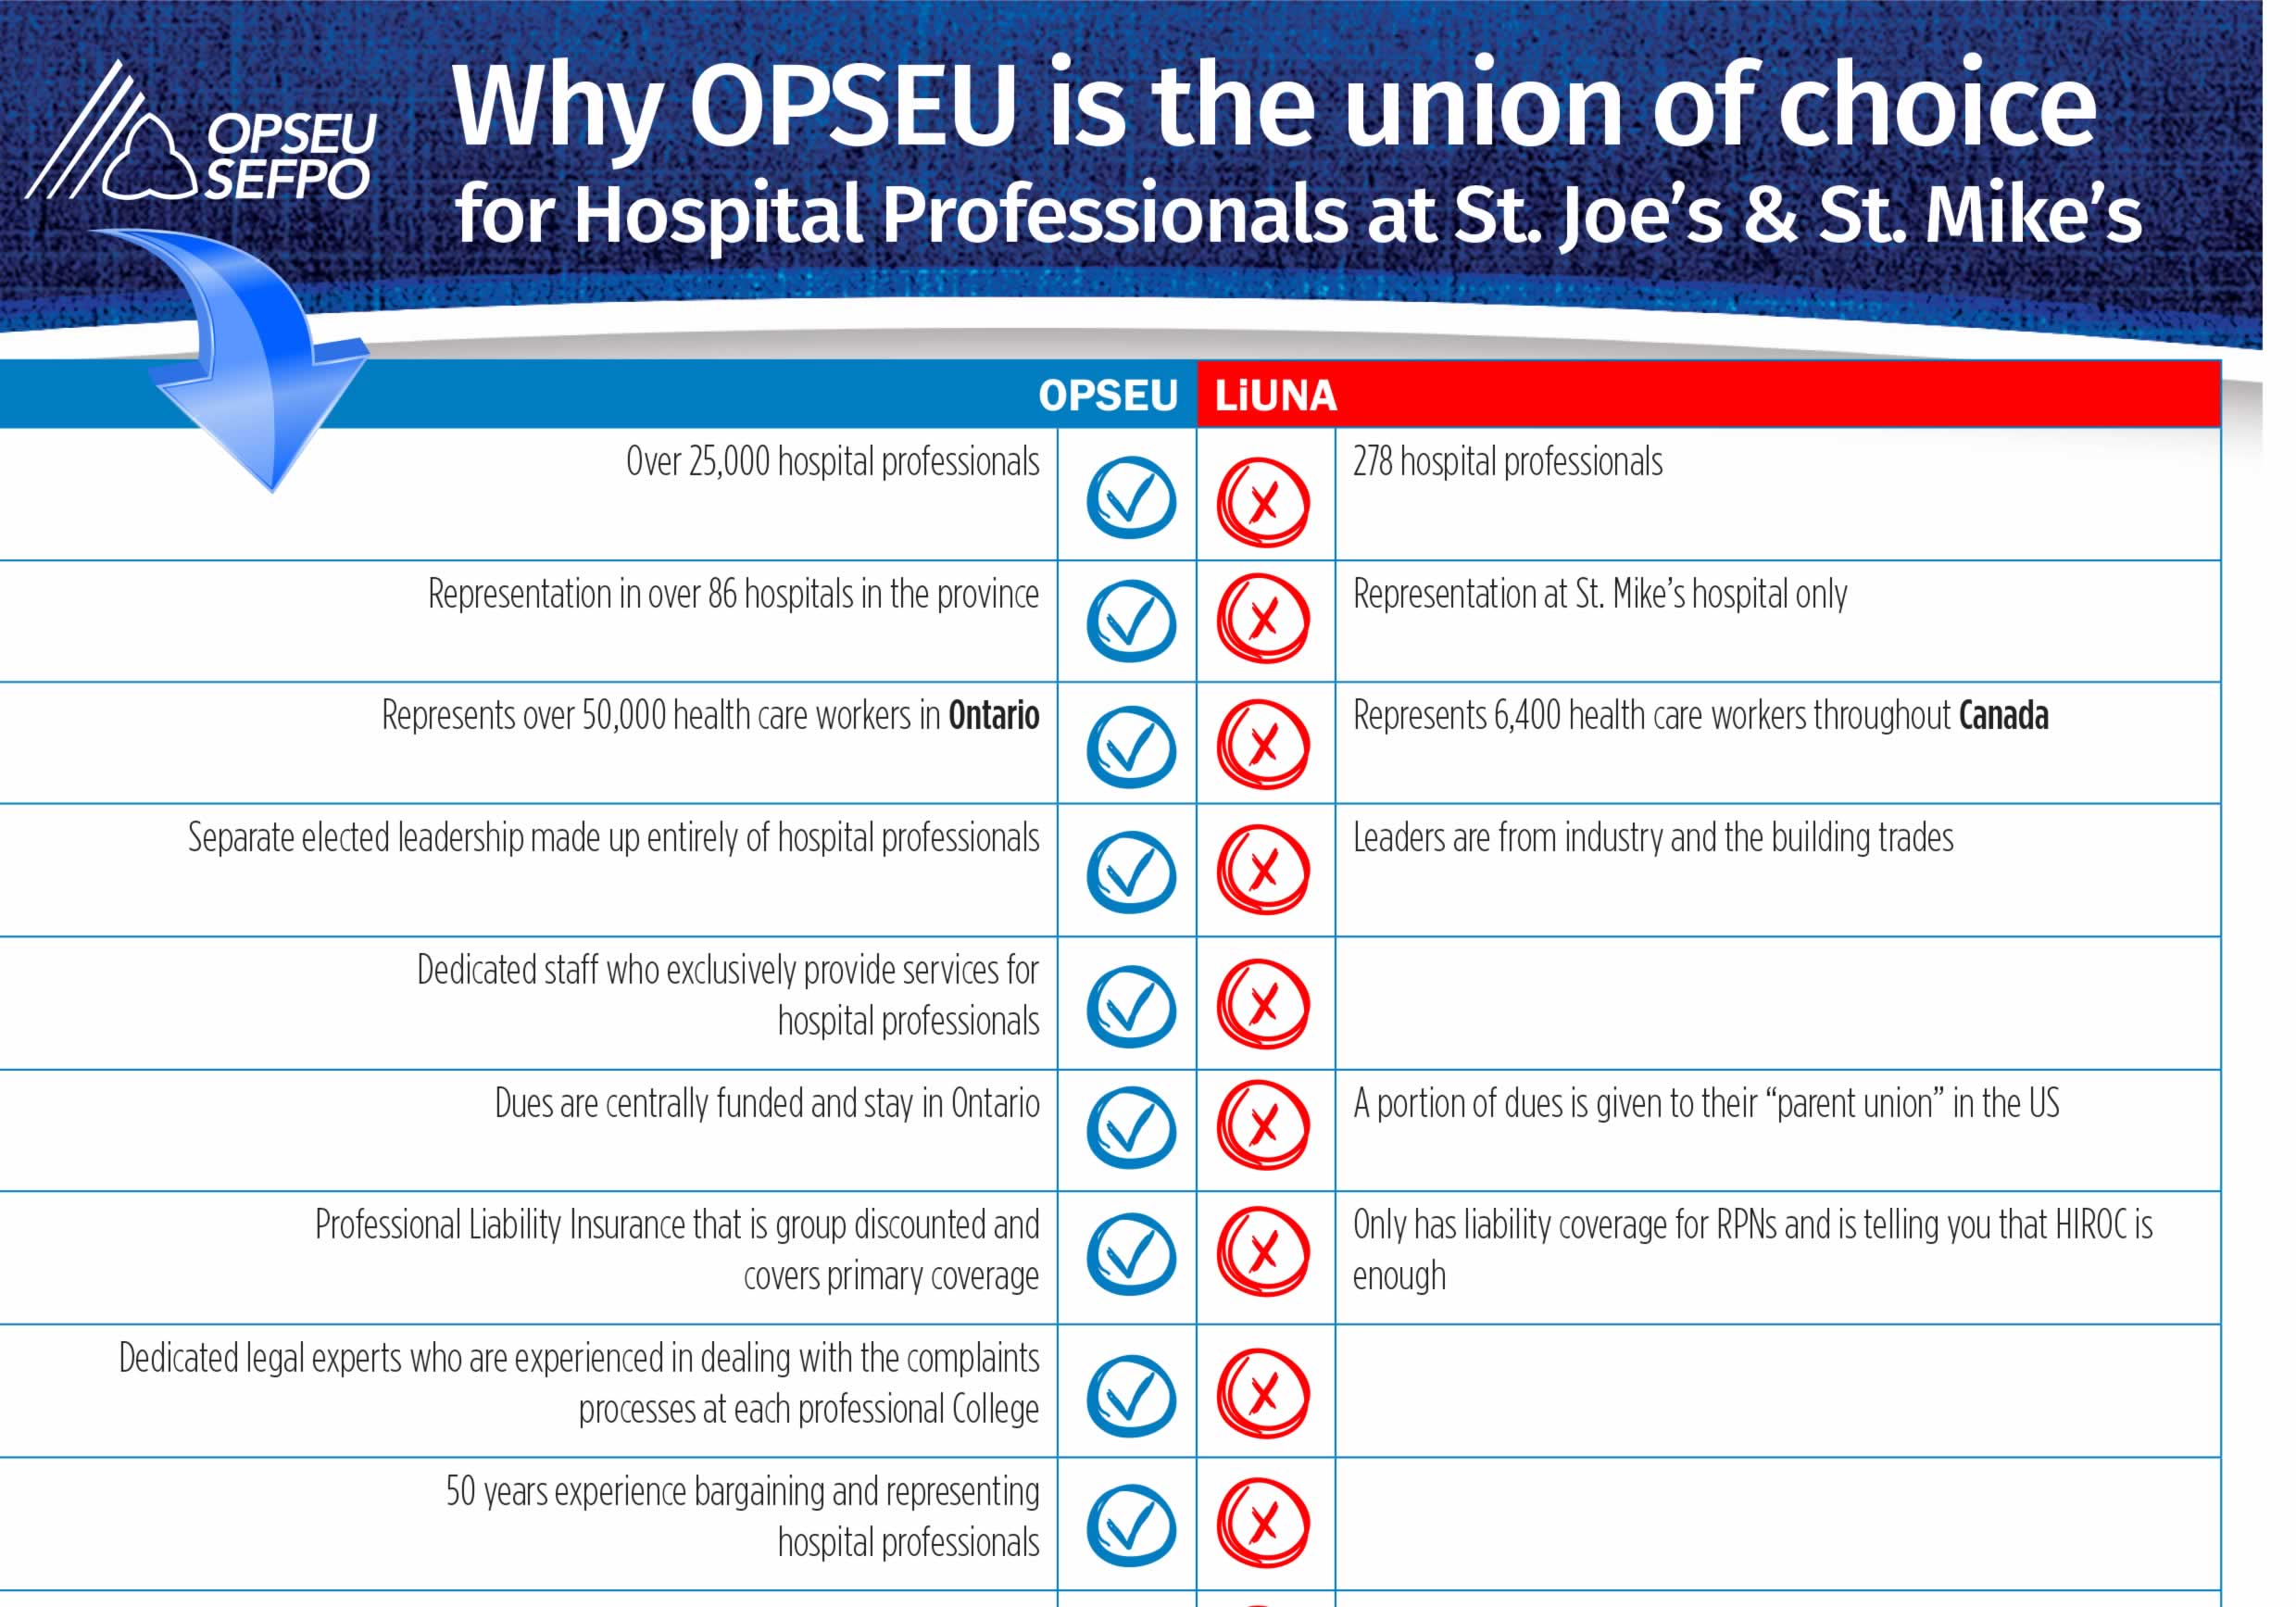 Why OPSEU is the union of choice for Hospital Professionals at St. Joe's and St. Mike's chart